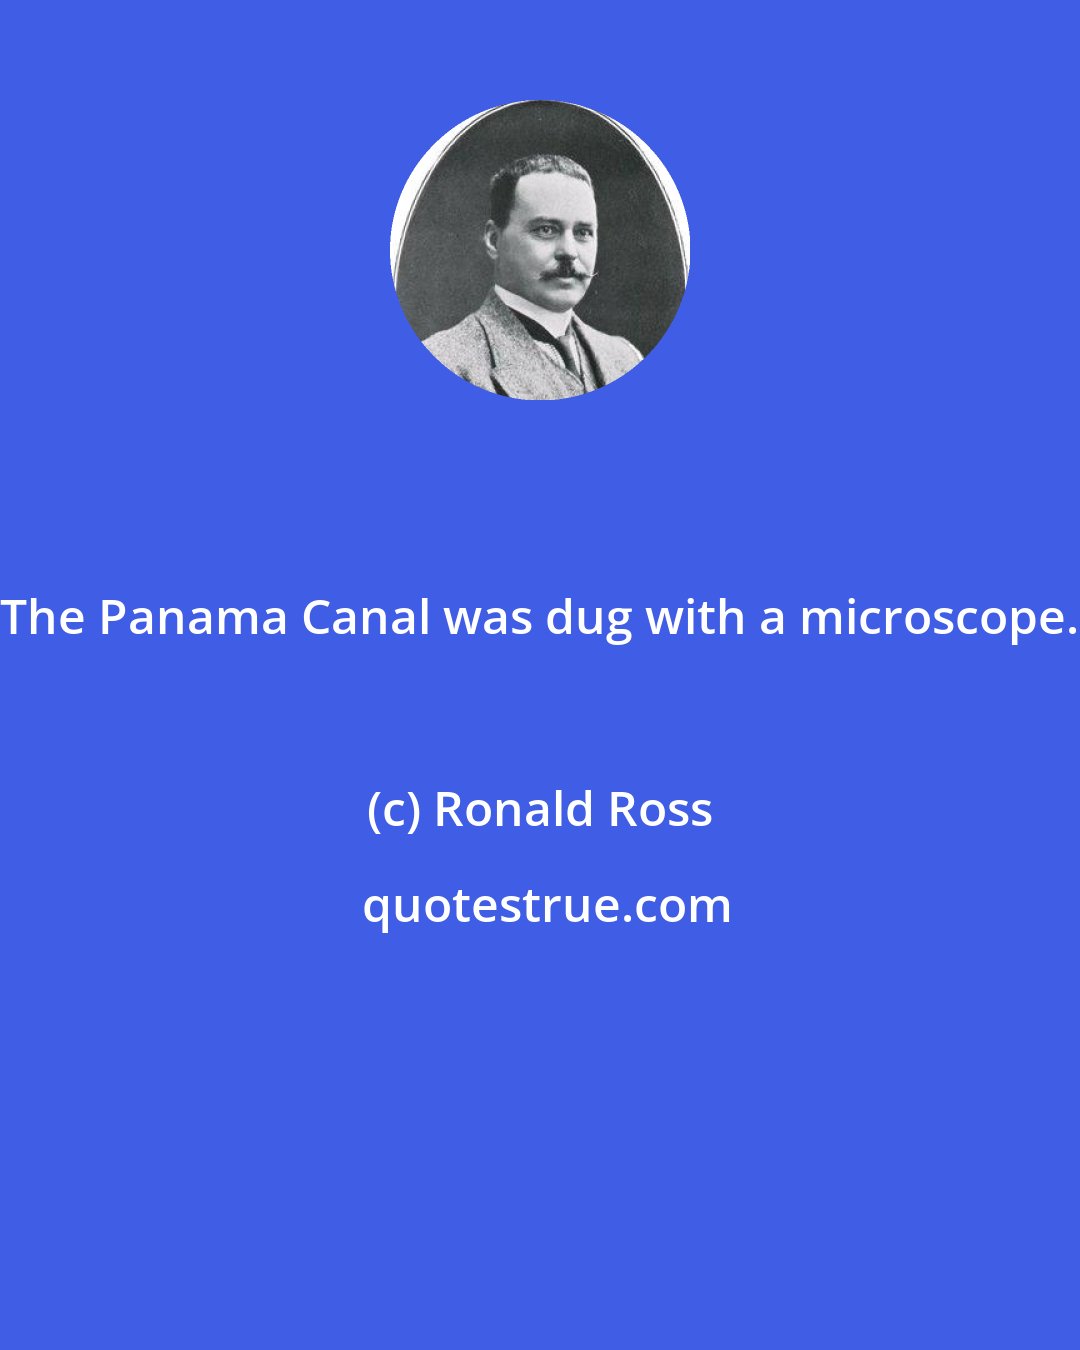 Ronald Ross: The Panama Canal was dug with a microscope.